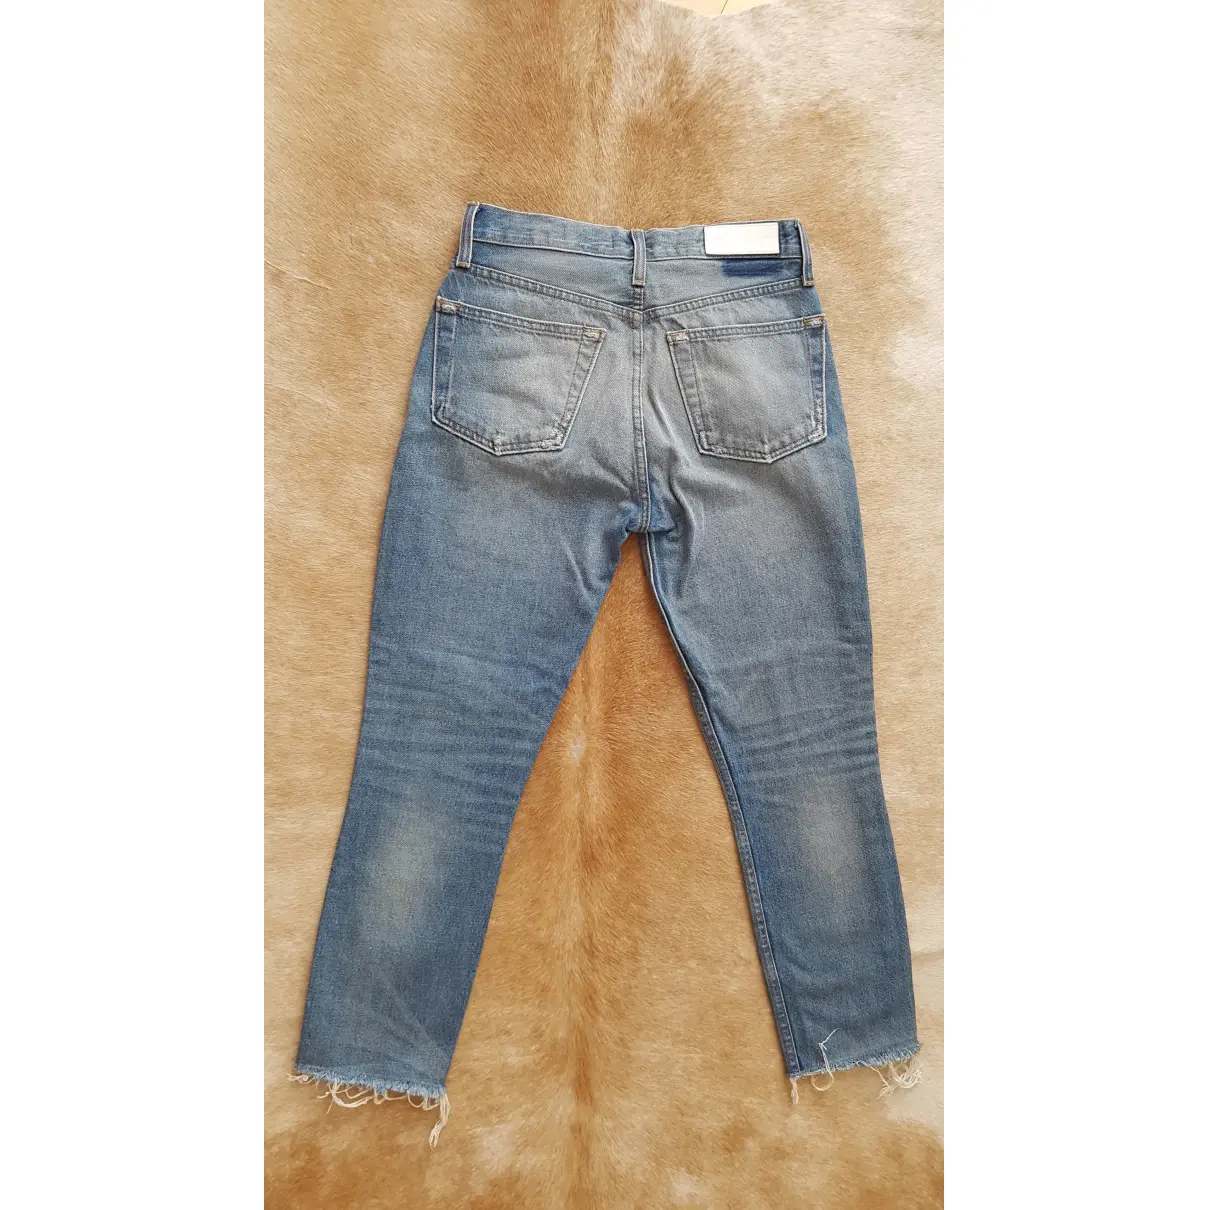 Buy Re/Done x Levi's Slim jeans online